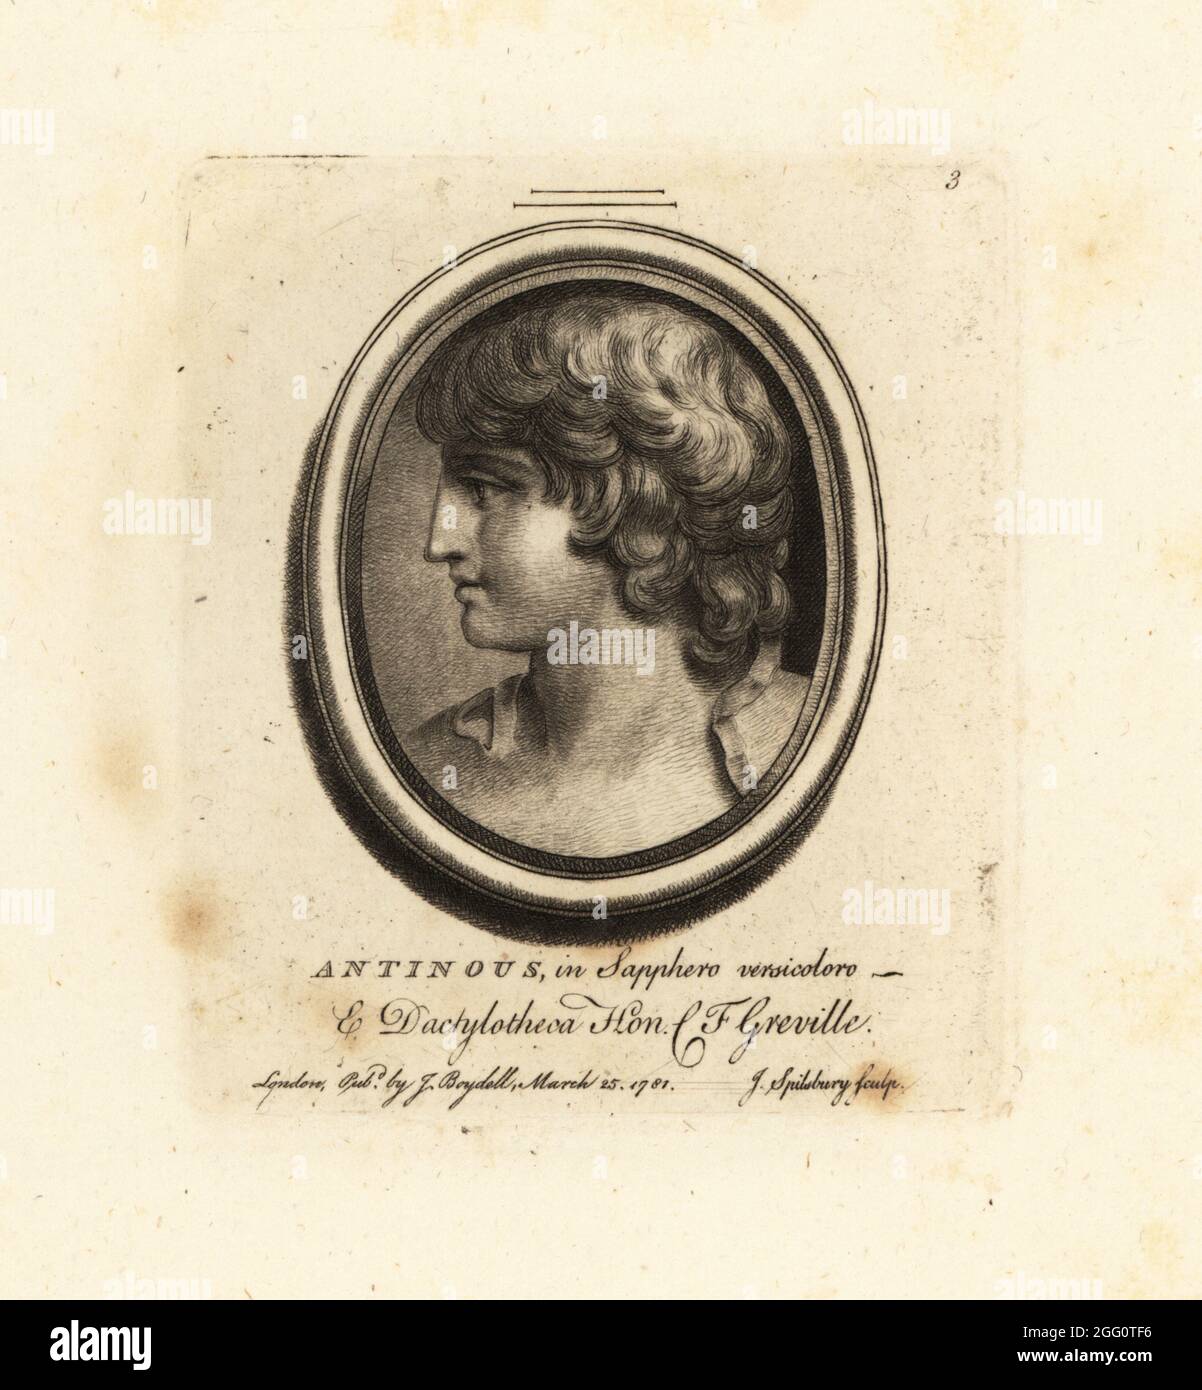 Portrait of Antinous in multicolour sapphire. Bithynian Greek youth and favourite of Roman emperor Hadrian. Antinous in Sapphero versicoloro & dactylotheca. From the collection of the antiquarian Charles Francis Greville. Mezzotint copperplate engraving by John Spilsbury from his Collection of Fifty Prints from Antique Gems, John Boydell, London, 1785. Stock Photo